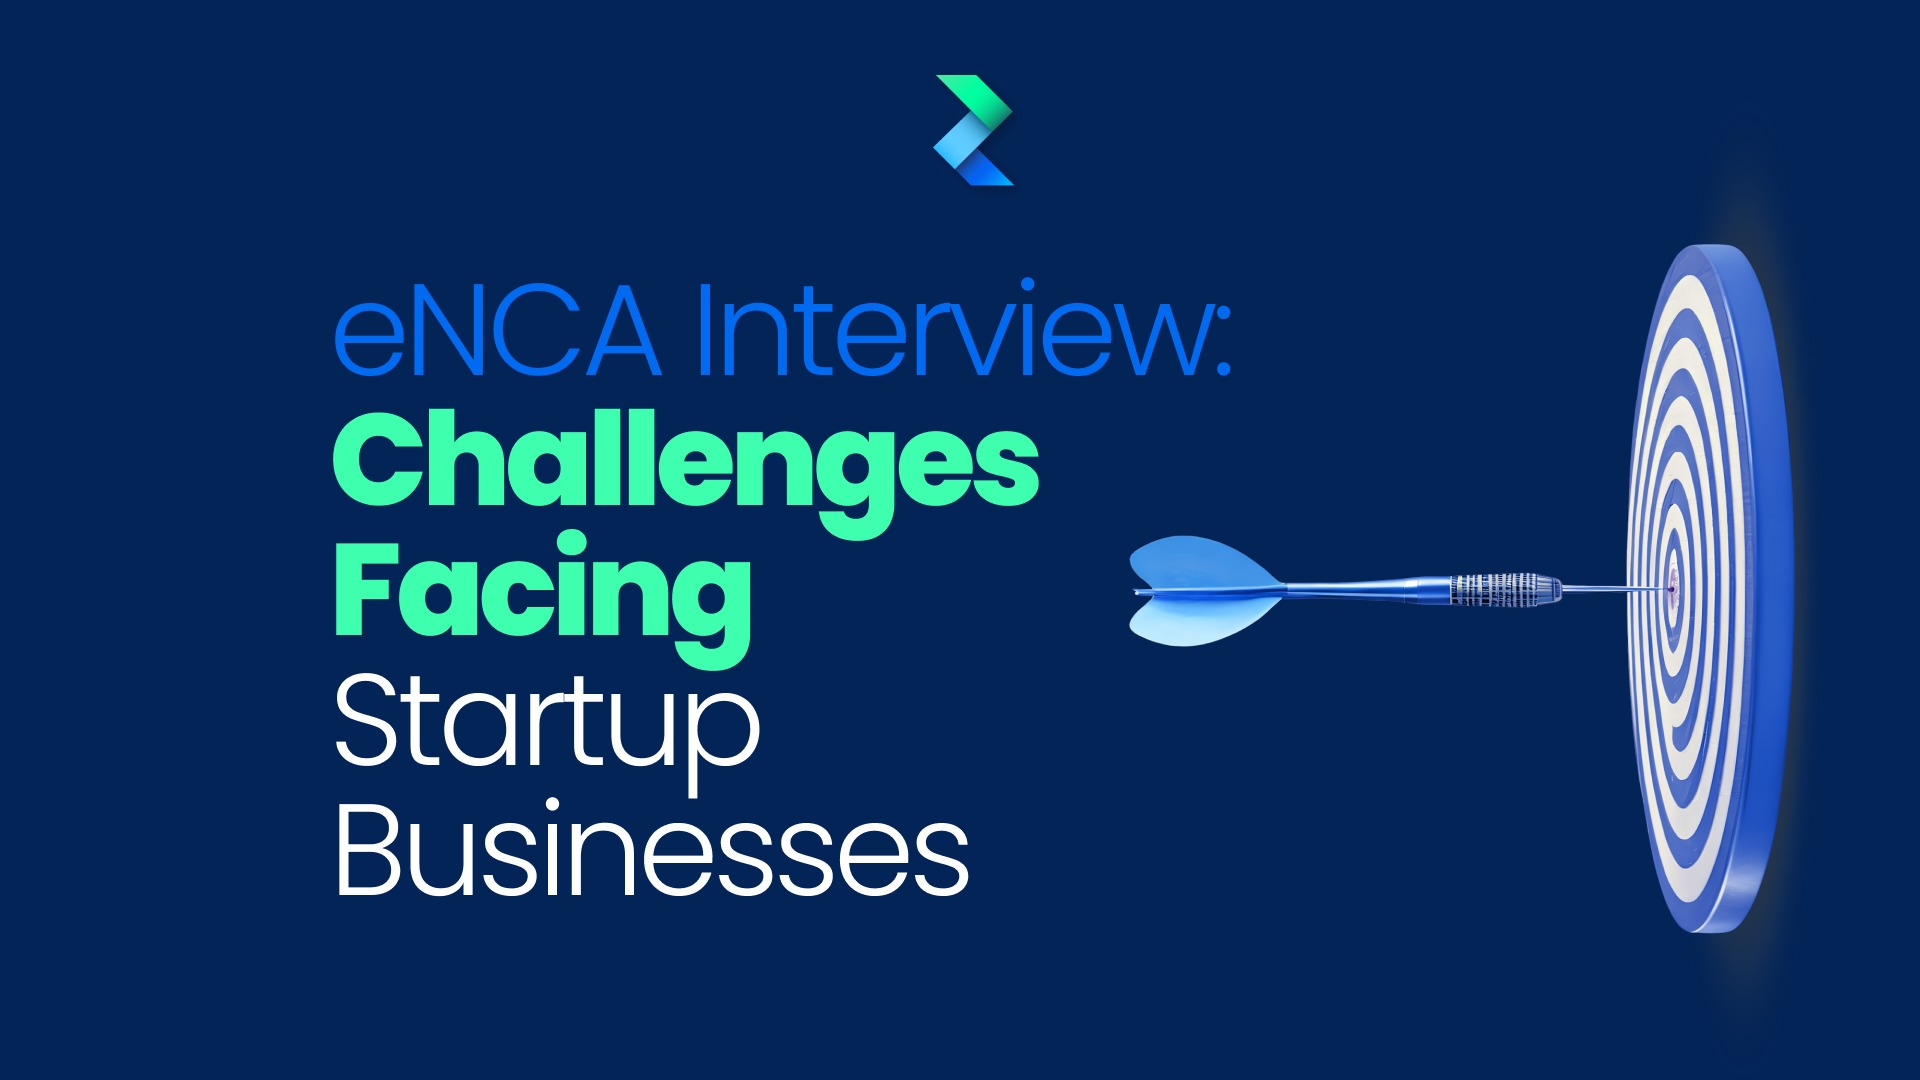 eNCA Interview: Challenges Facing Startup Businesses.